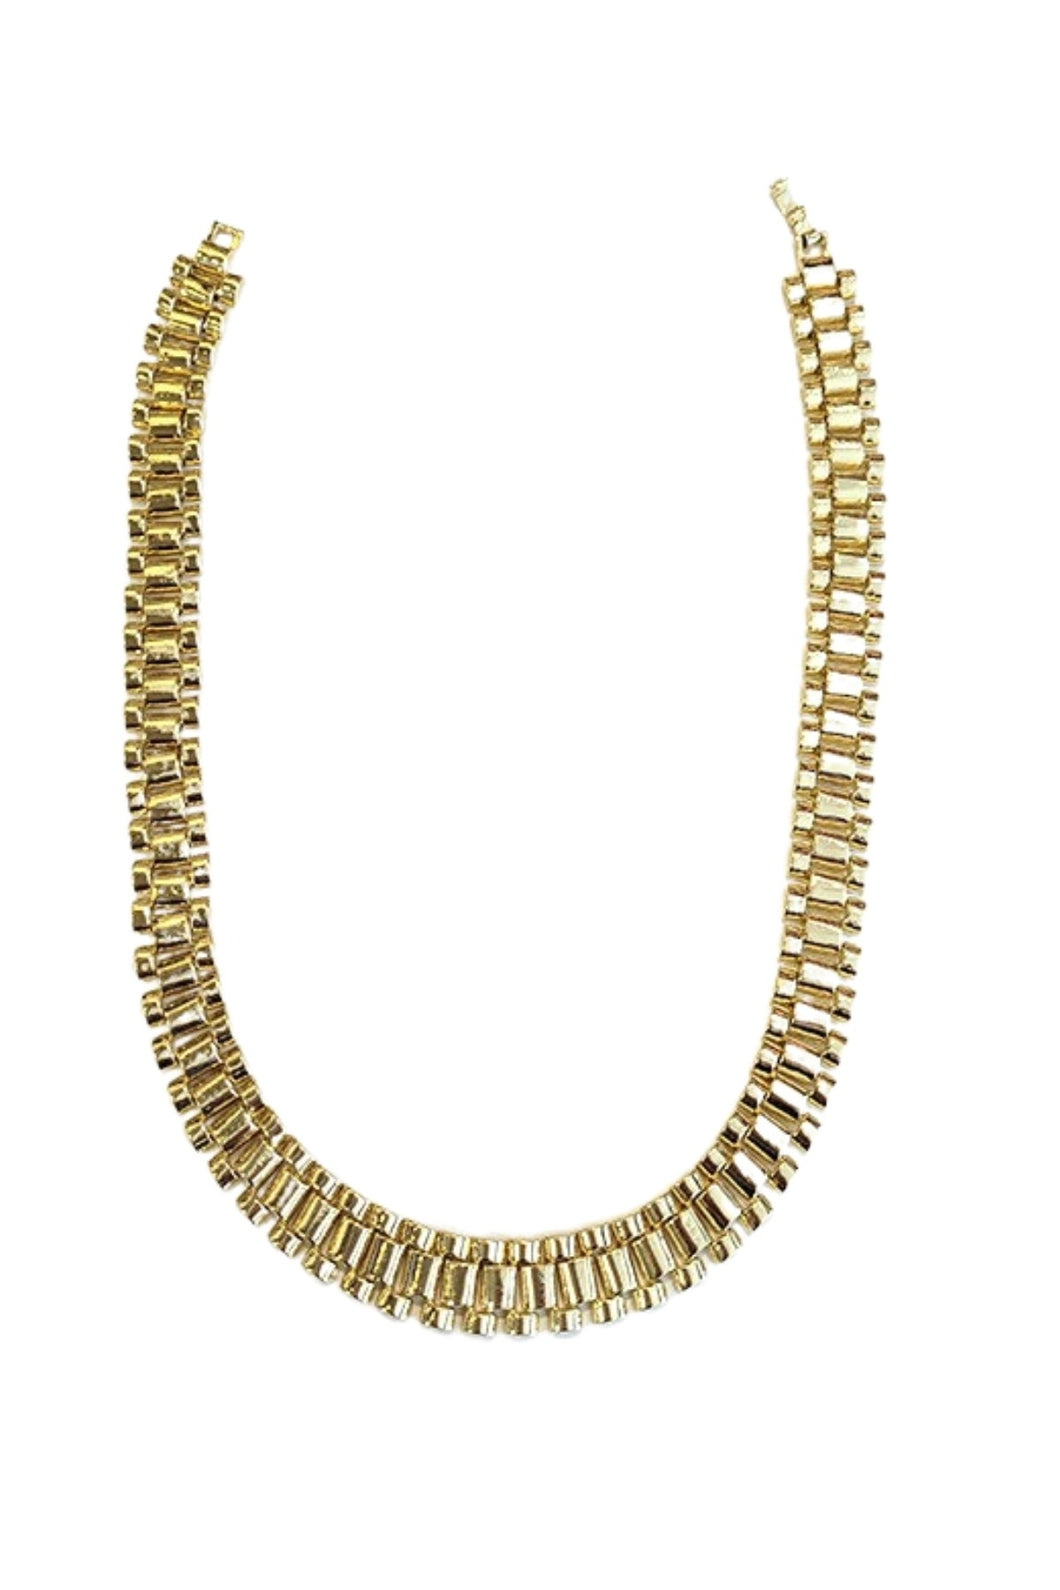 14KT GOLD PLATED 16mm CHAIN NECKLACE